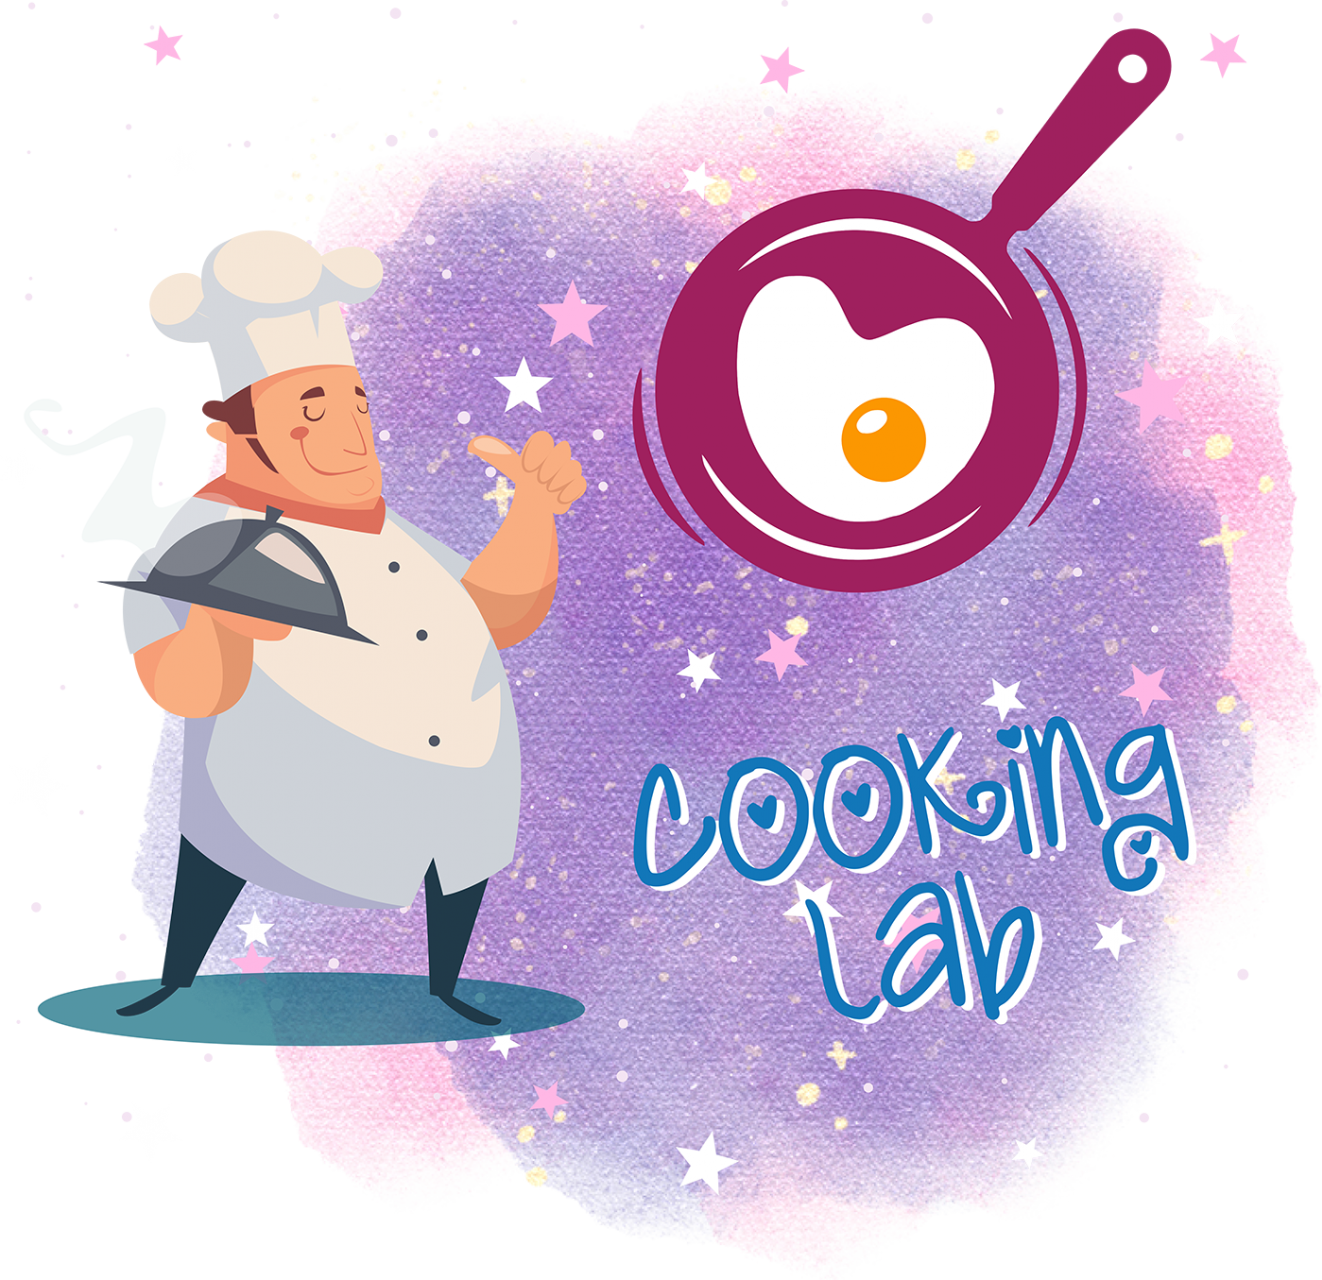 Cooking lab